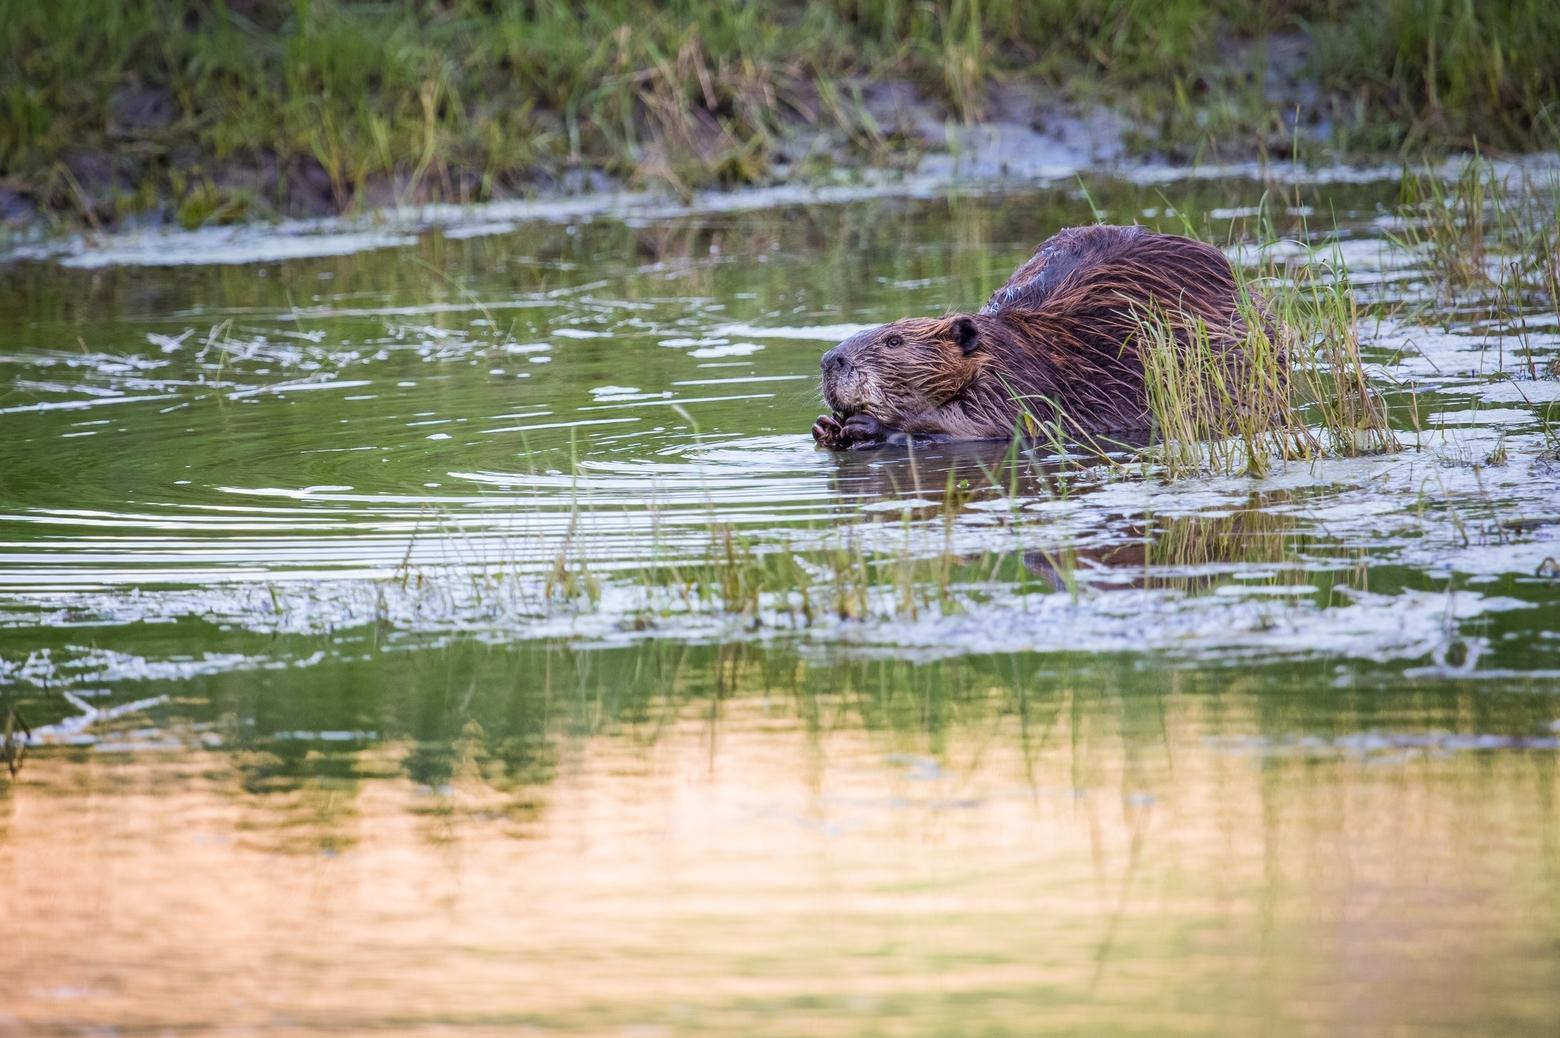 Beavers, like this one on Yellowstone's Lamar River, are a keystone species that affect ecosystem dynamics by damming and diverting waterways. Photo by Neal Herbert/ NPS